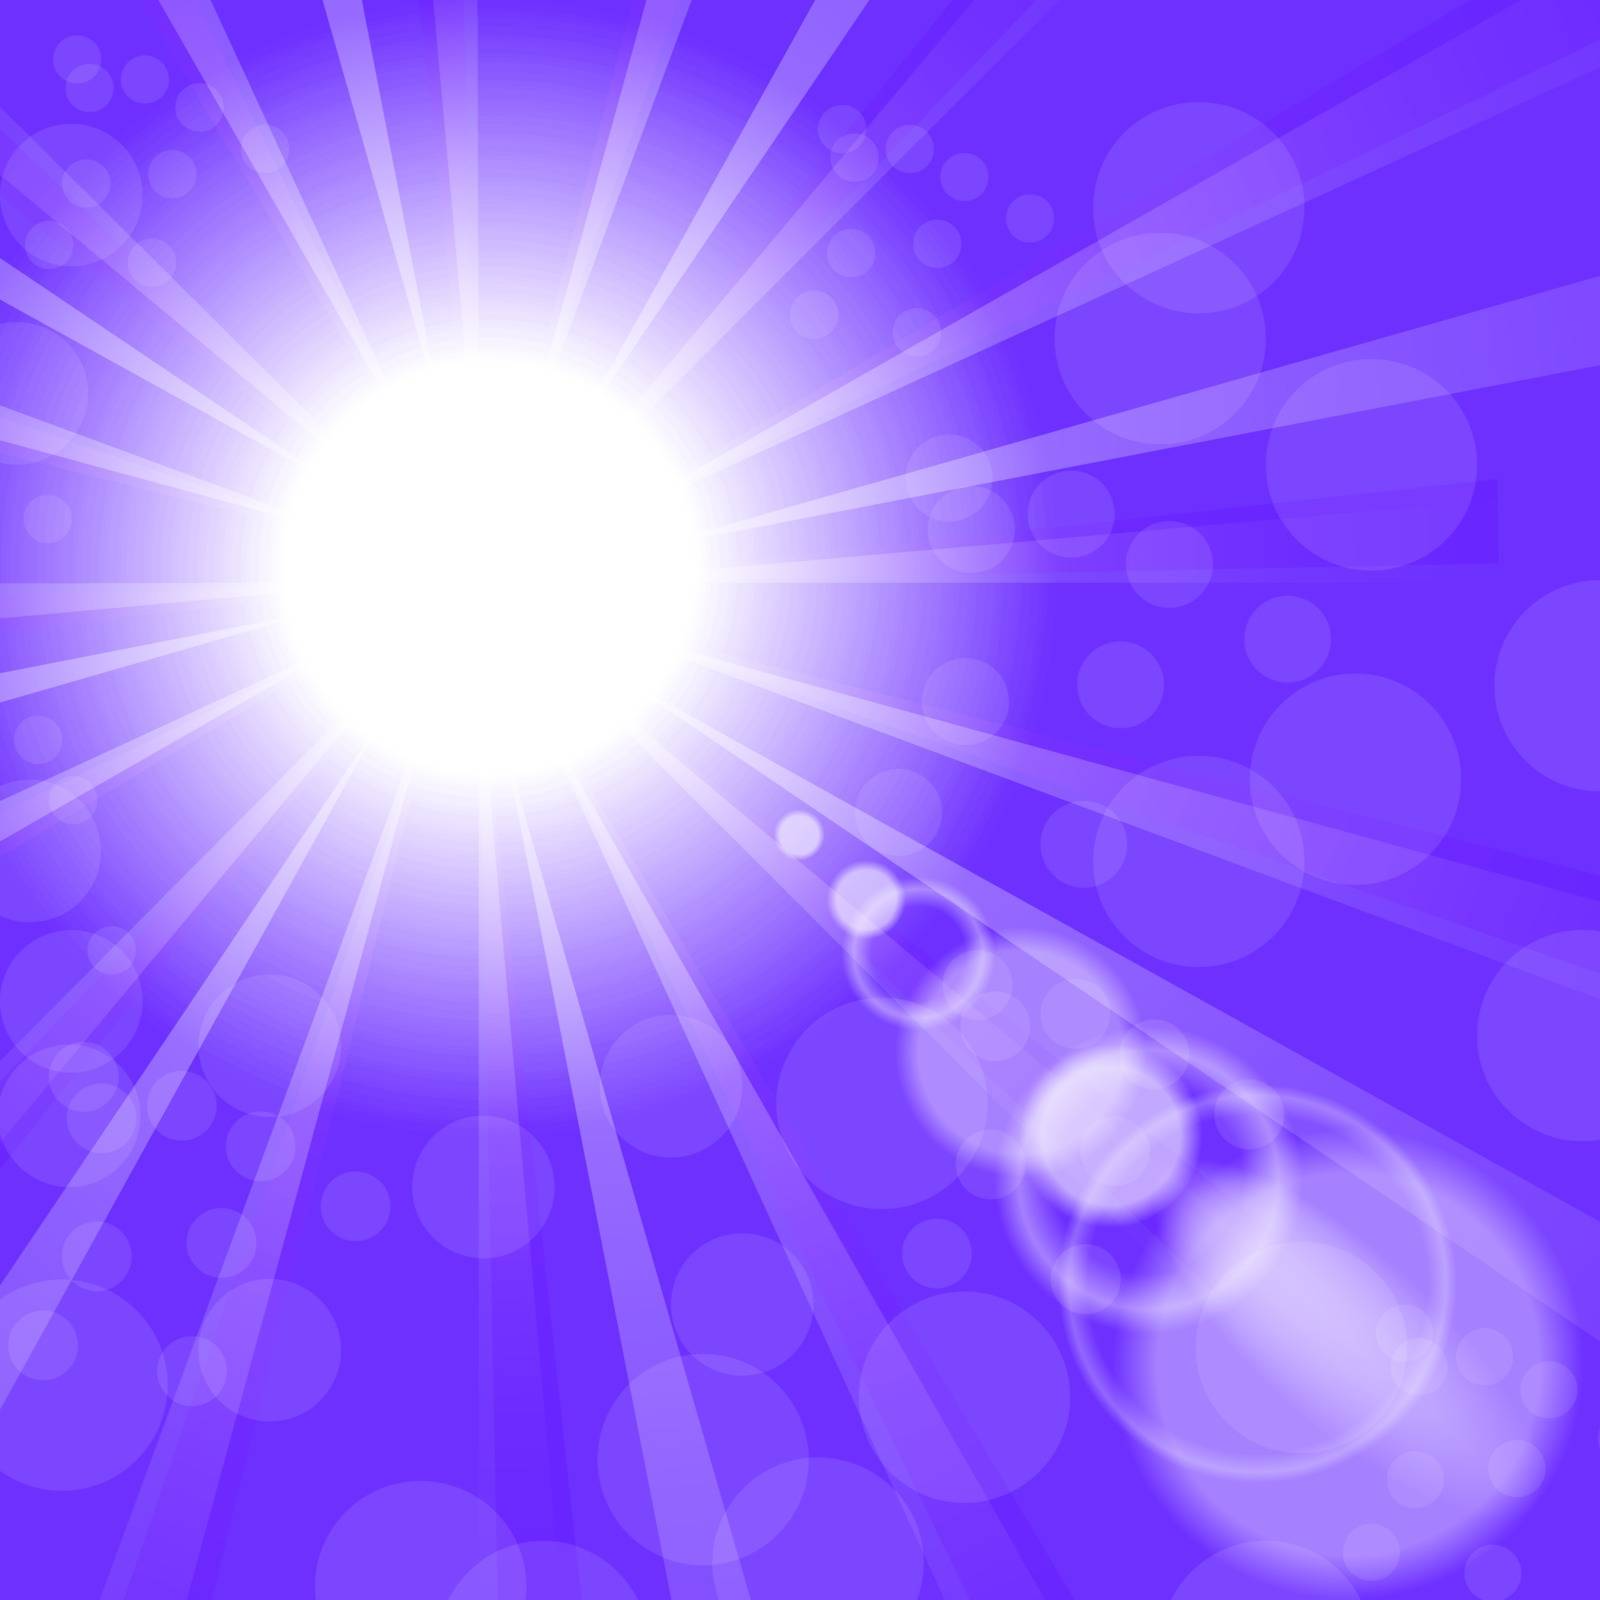 Abstract Sun Background. Blue Summer Pattern. Bright Background with Sunshine. SunBurst with Flare and Lens.